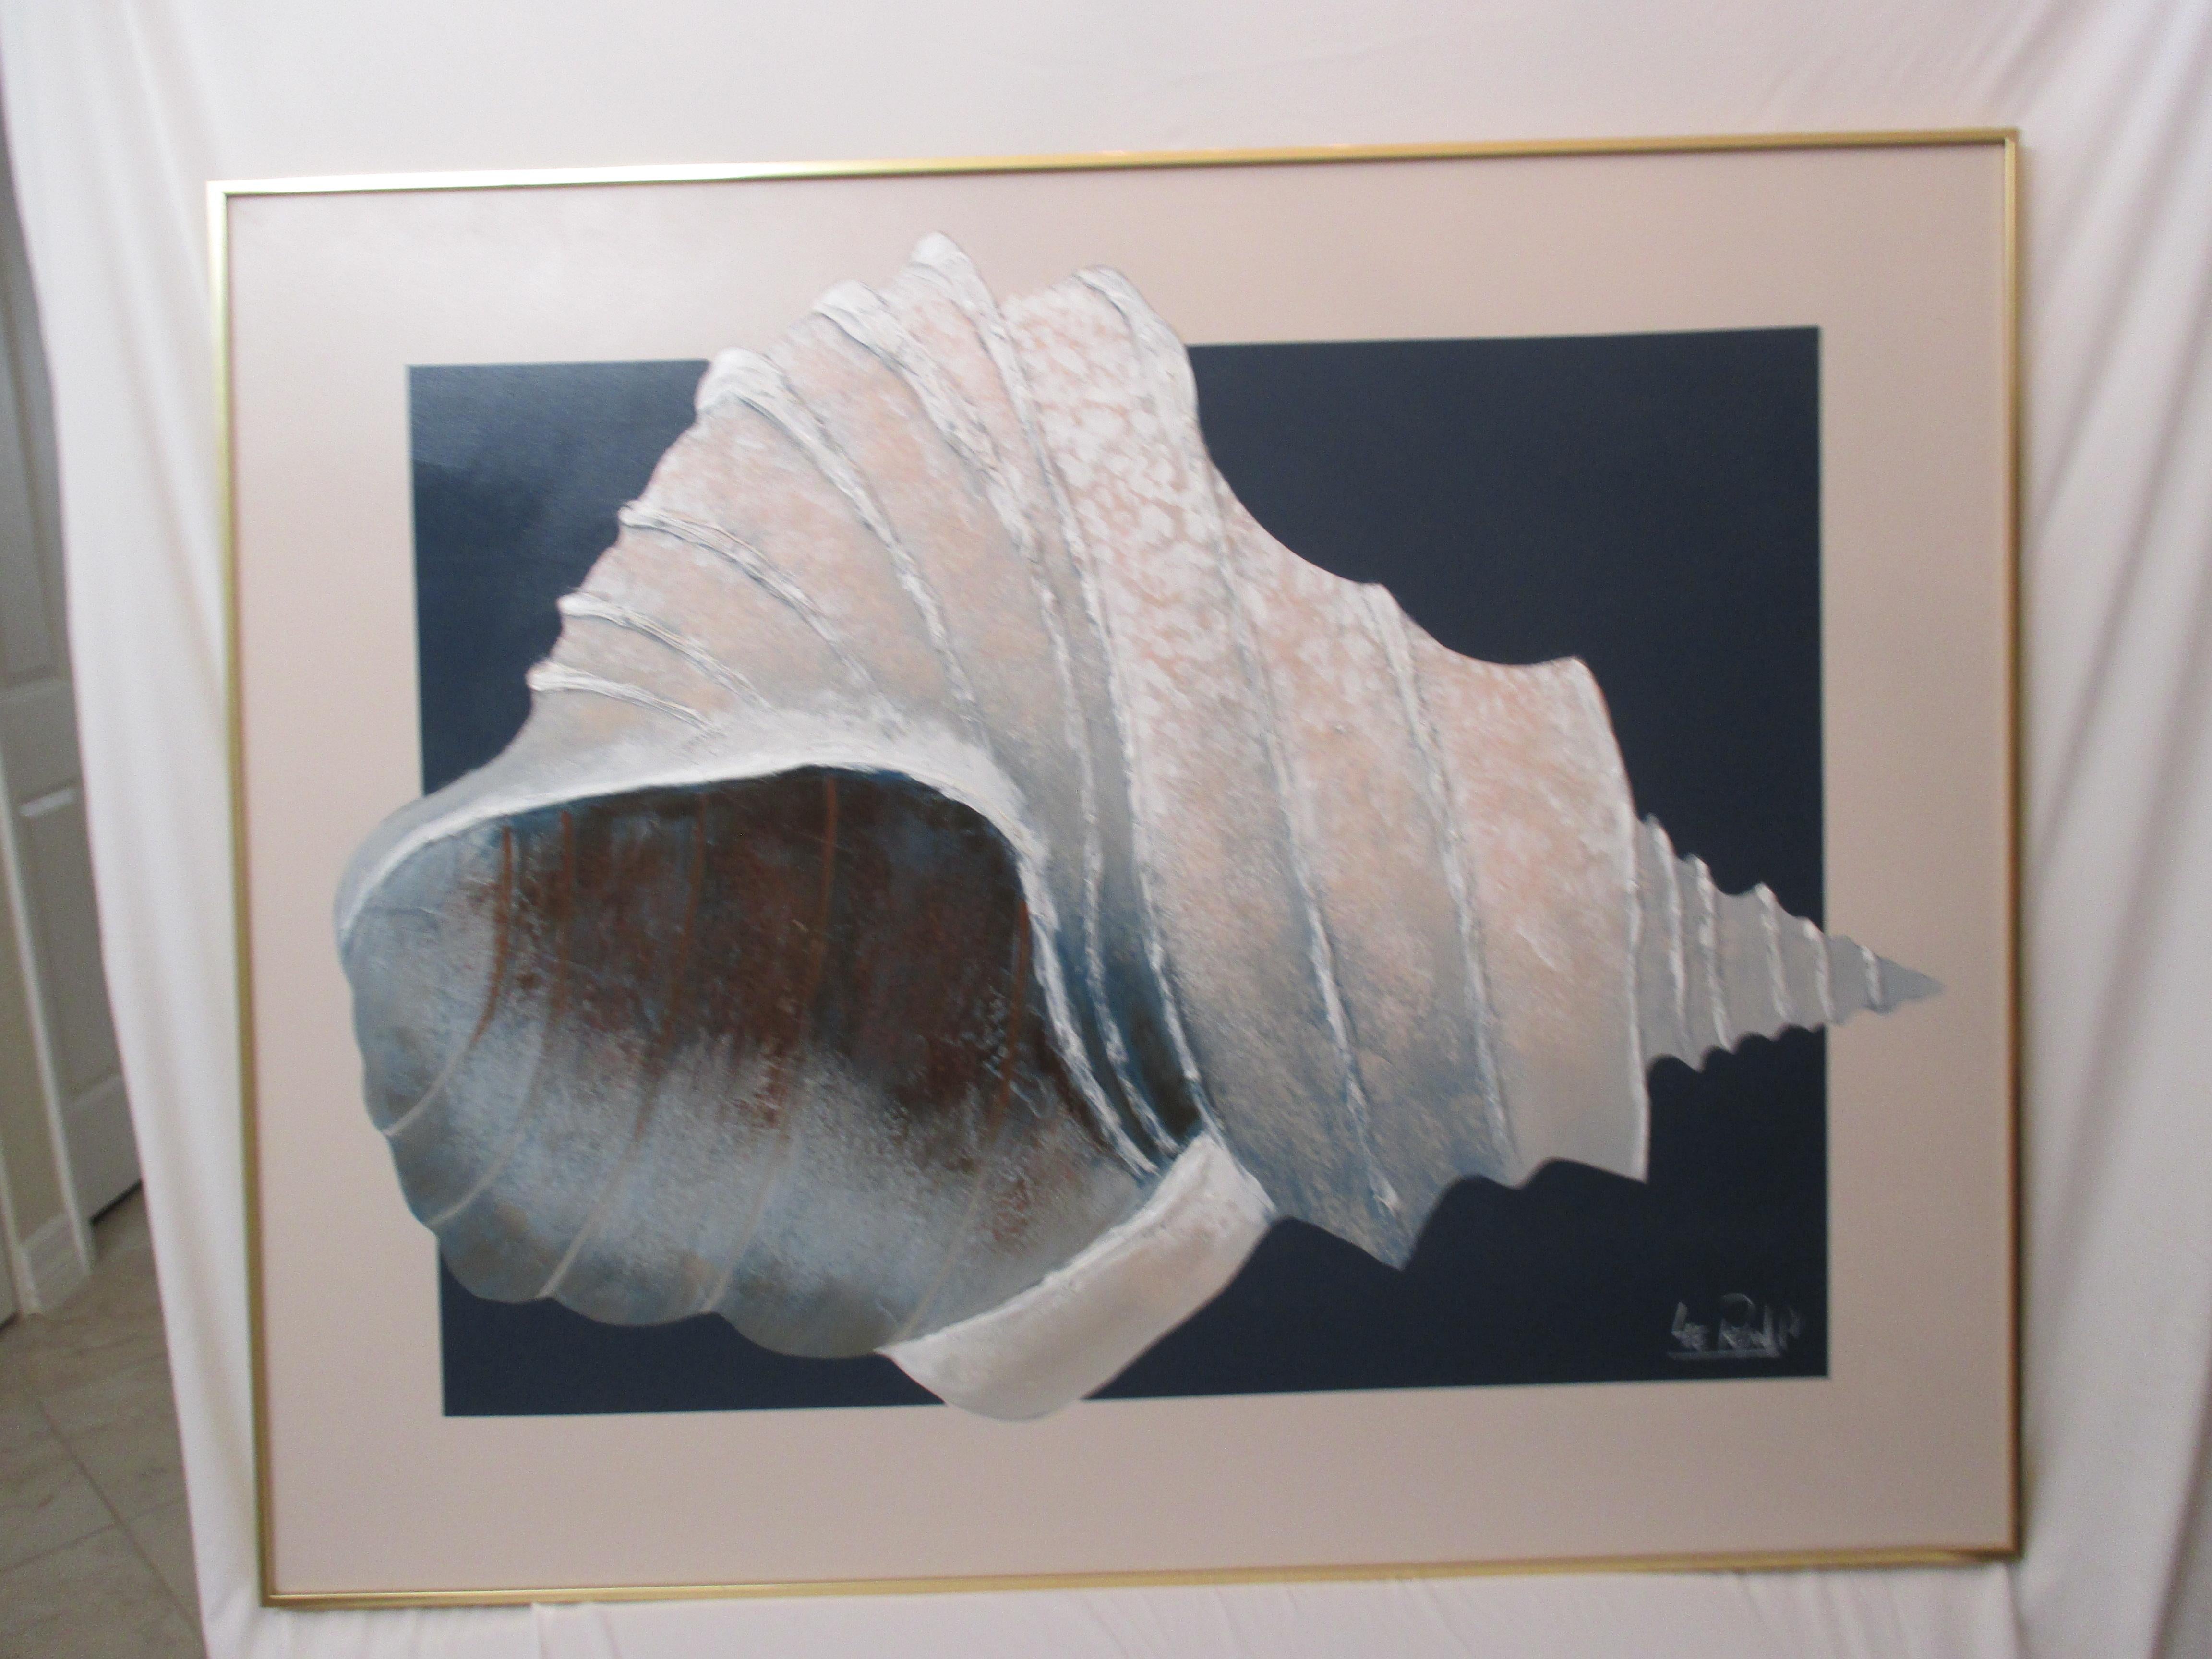 Oversized Lee Reynolds acrylic seashell painting with magnificent texture on canvas. Painting is signed in bottom right corner. Hanging hardware is attached.